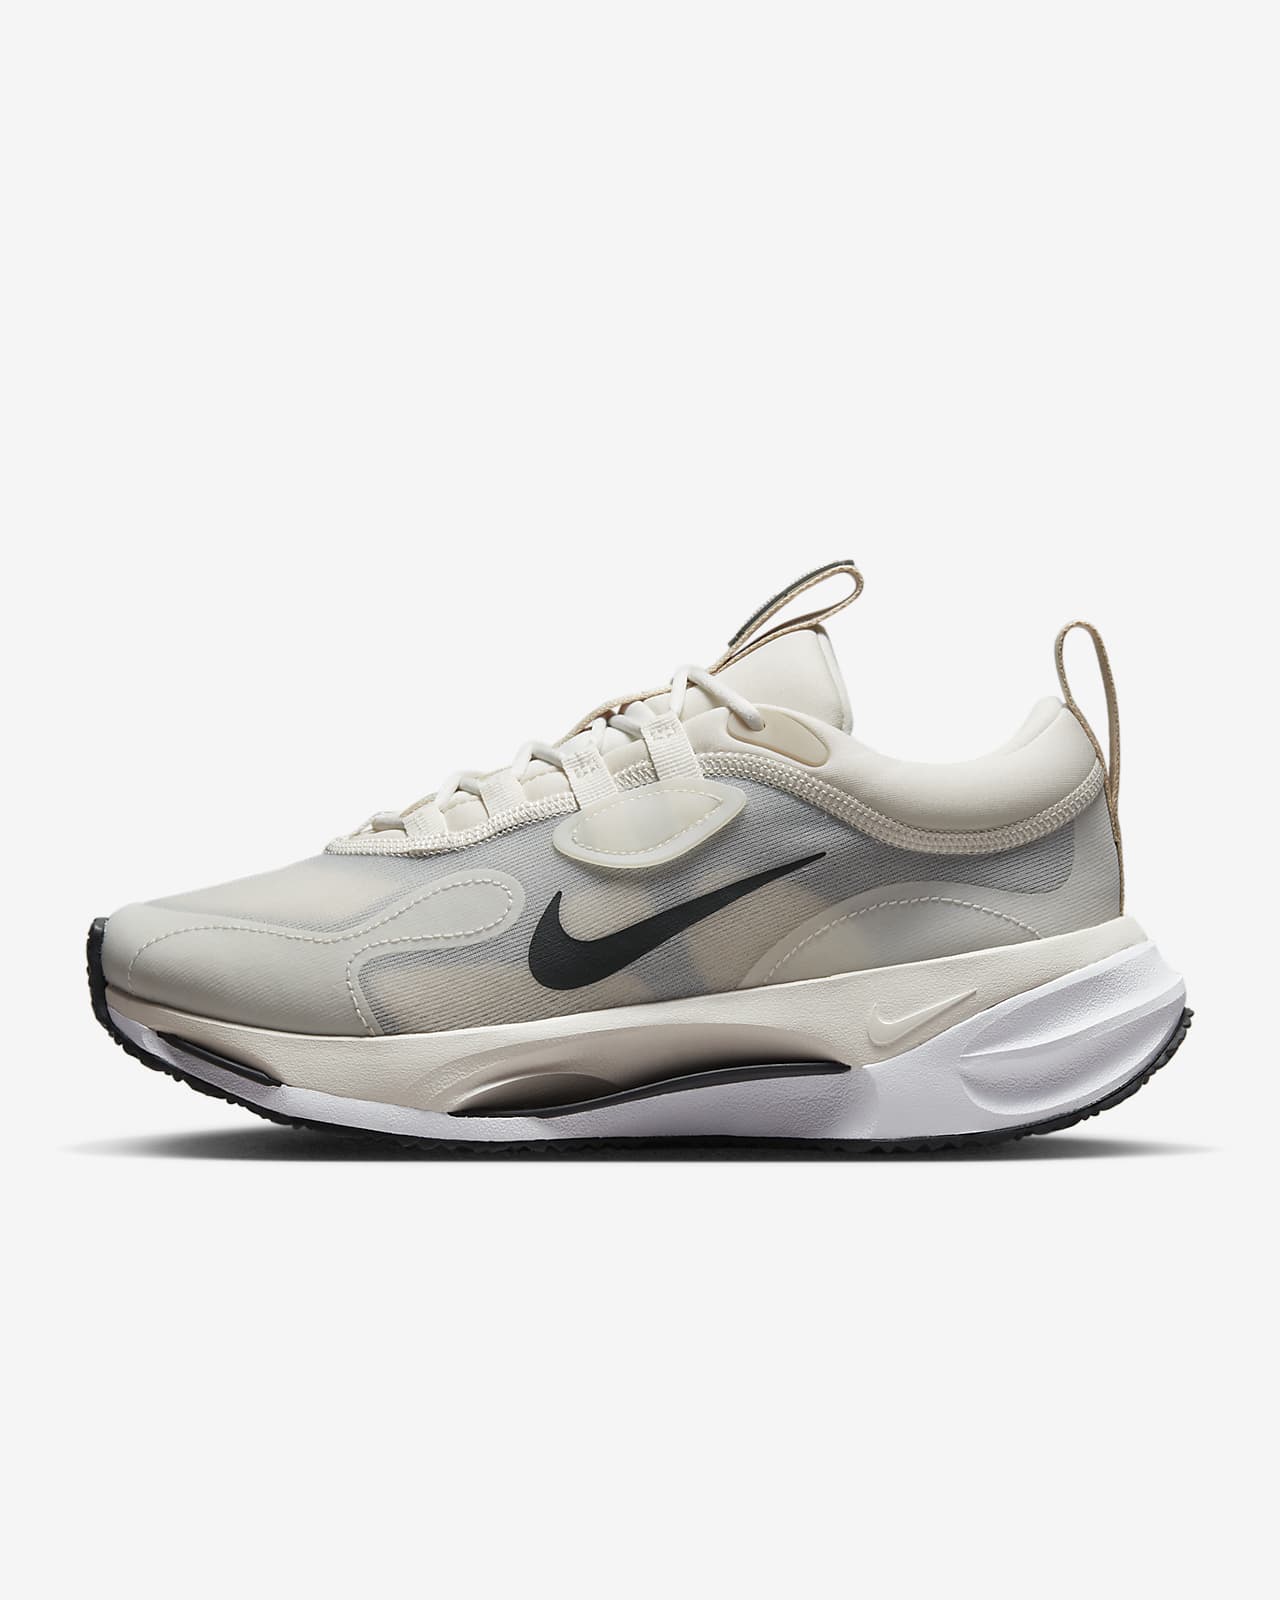 Nike Spark Women's Shoes